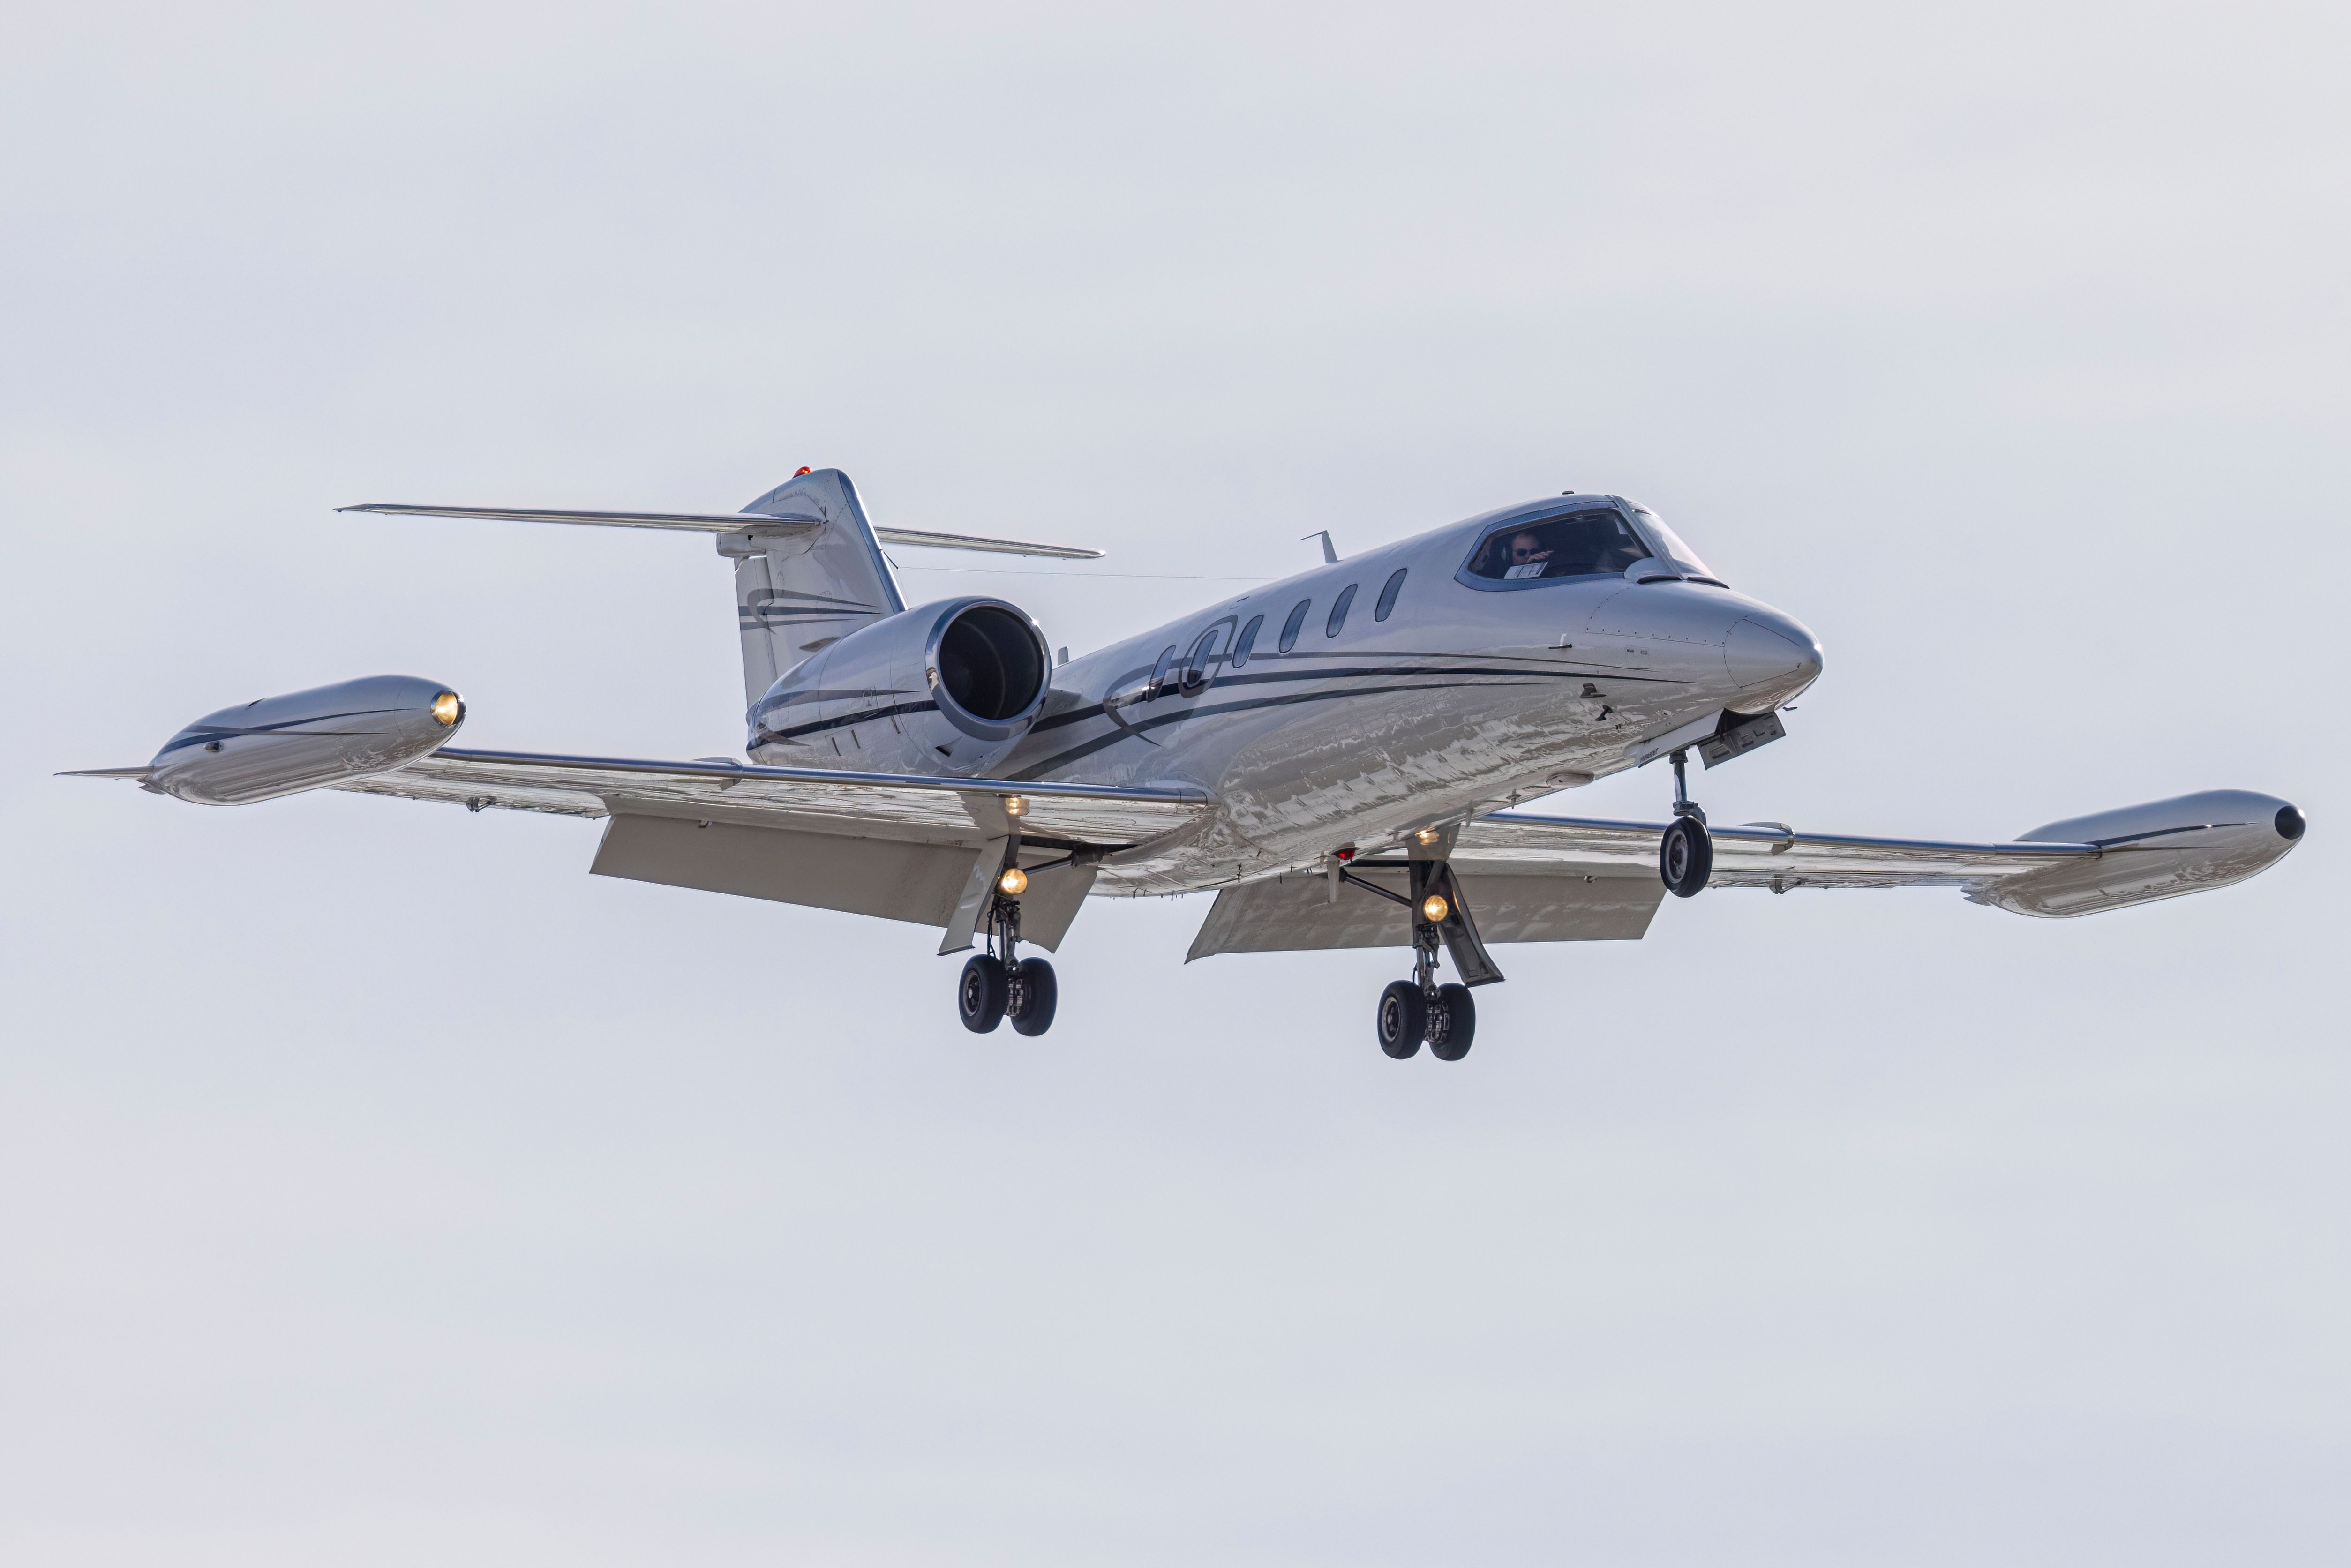 A Learjet 35 comes in for a landing at the Centennial Airport.